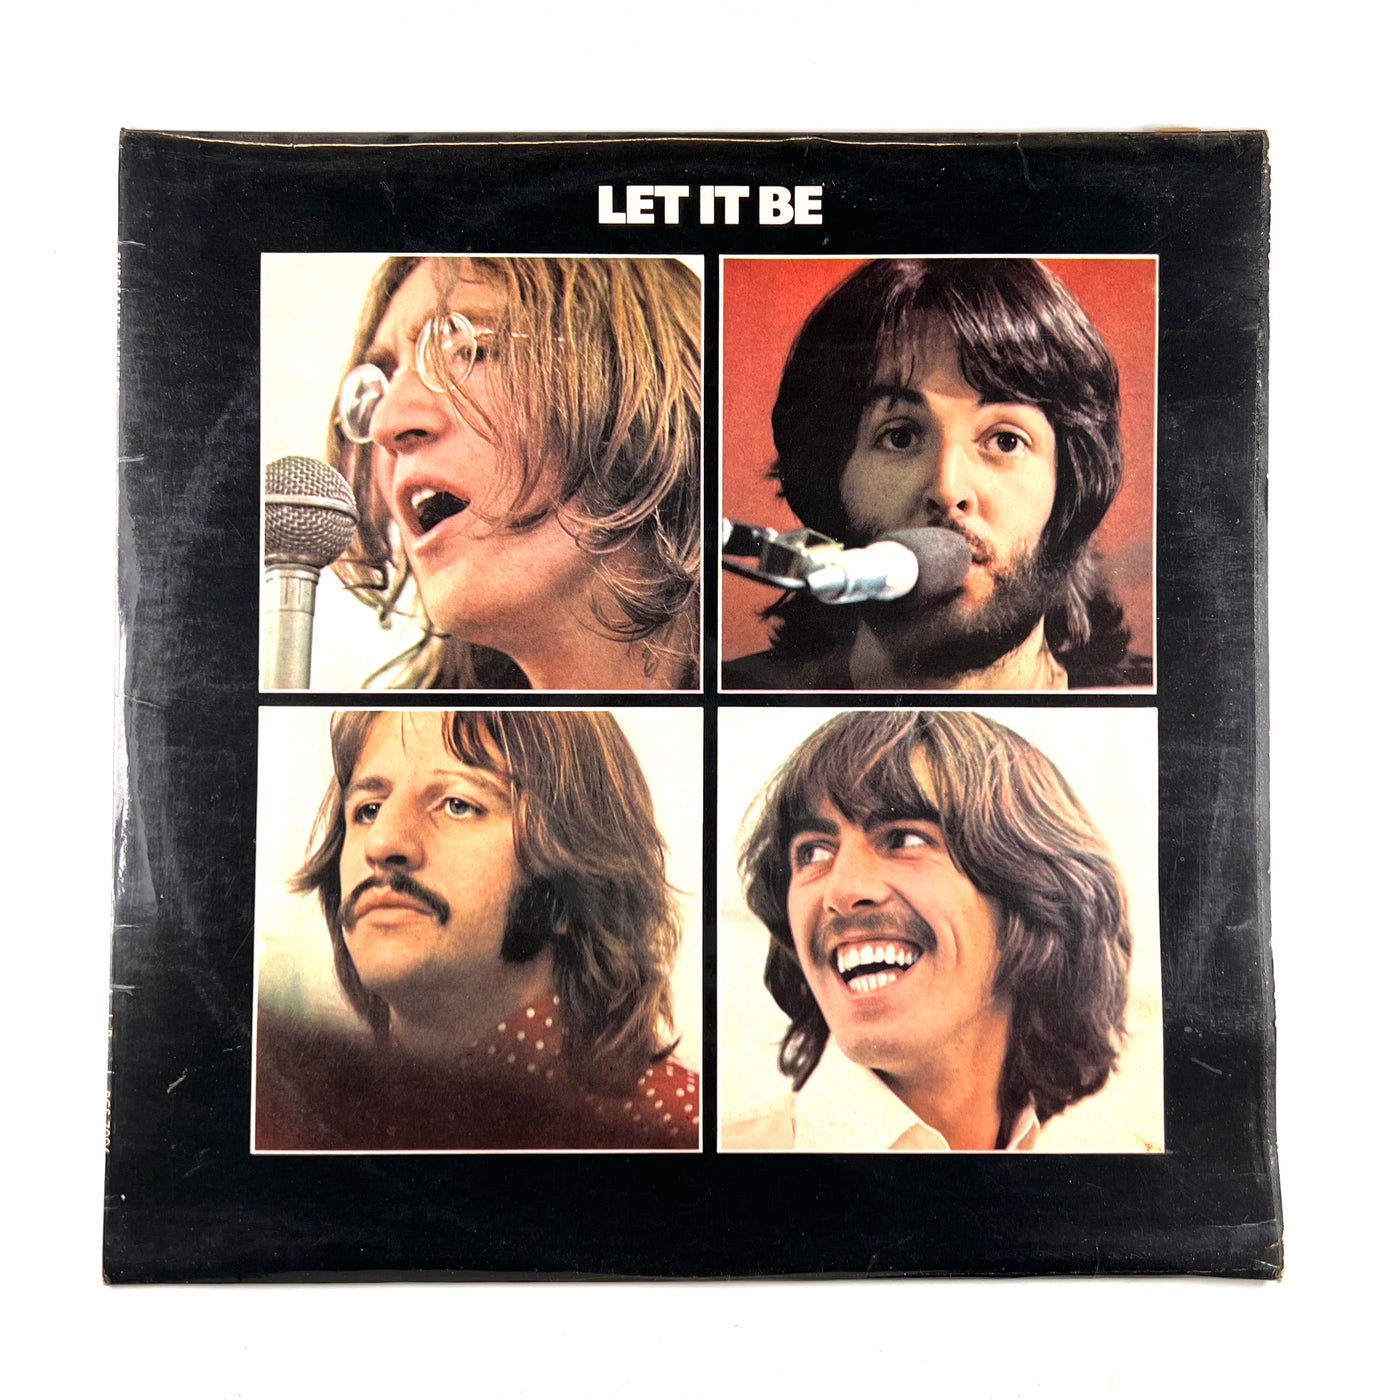 The Beatles - Let It Be - 1970 UK Reissue